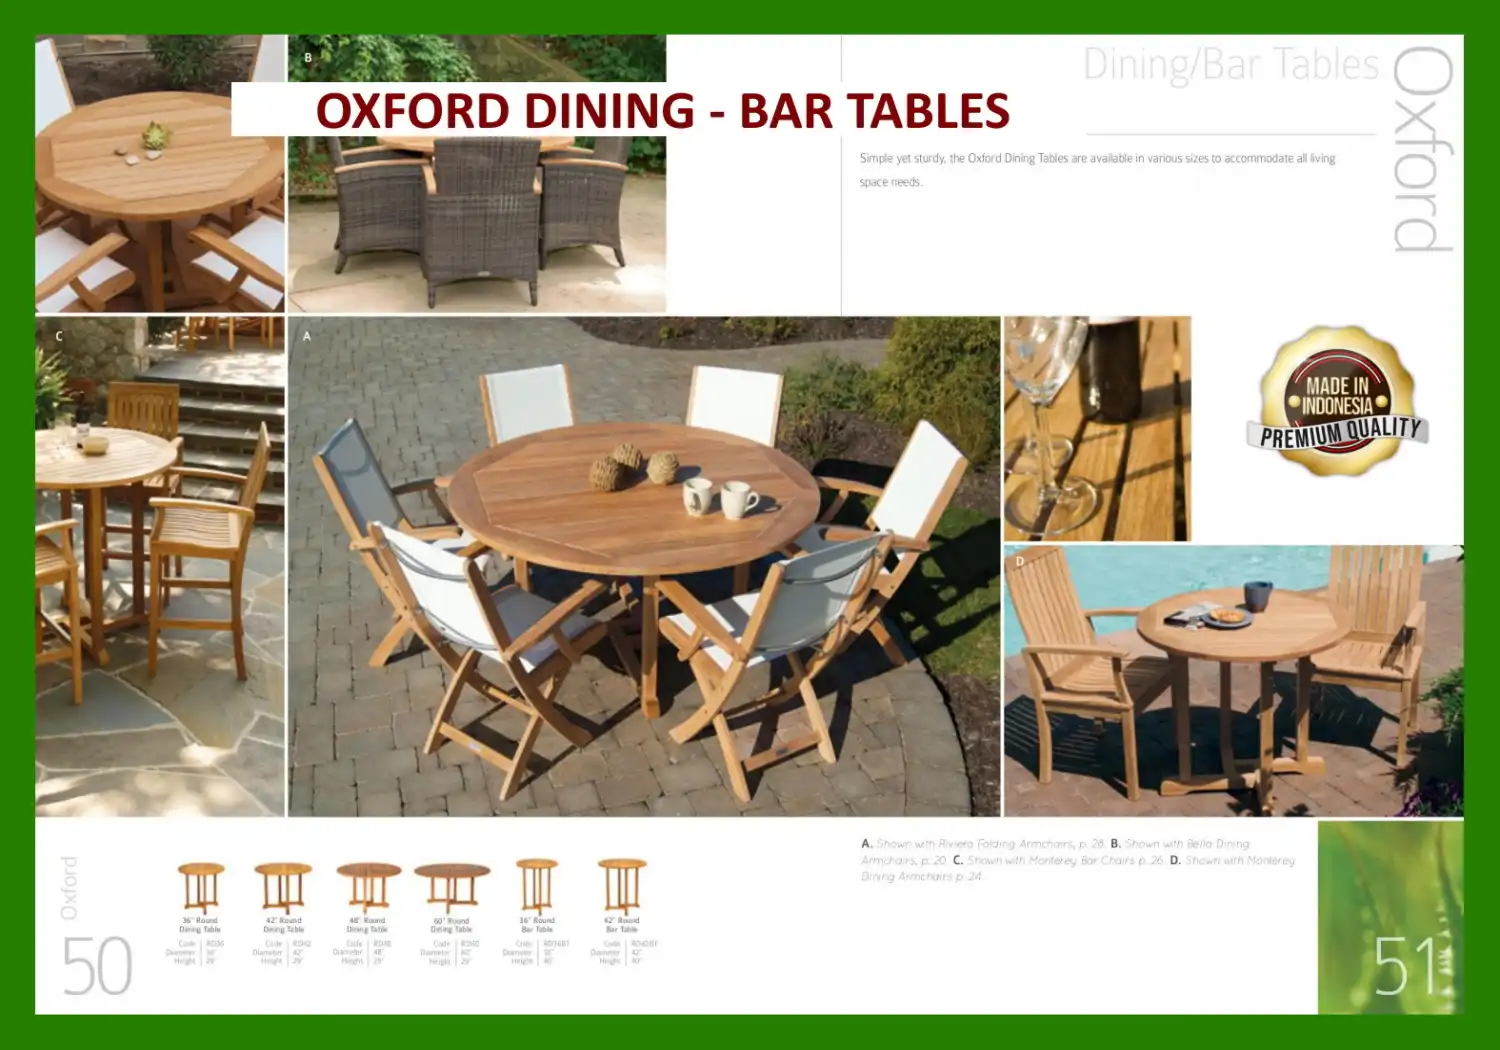 OXFORD DINING - BAR TABLES